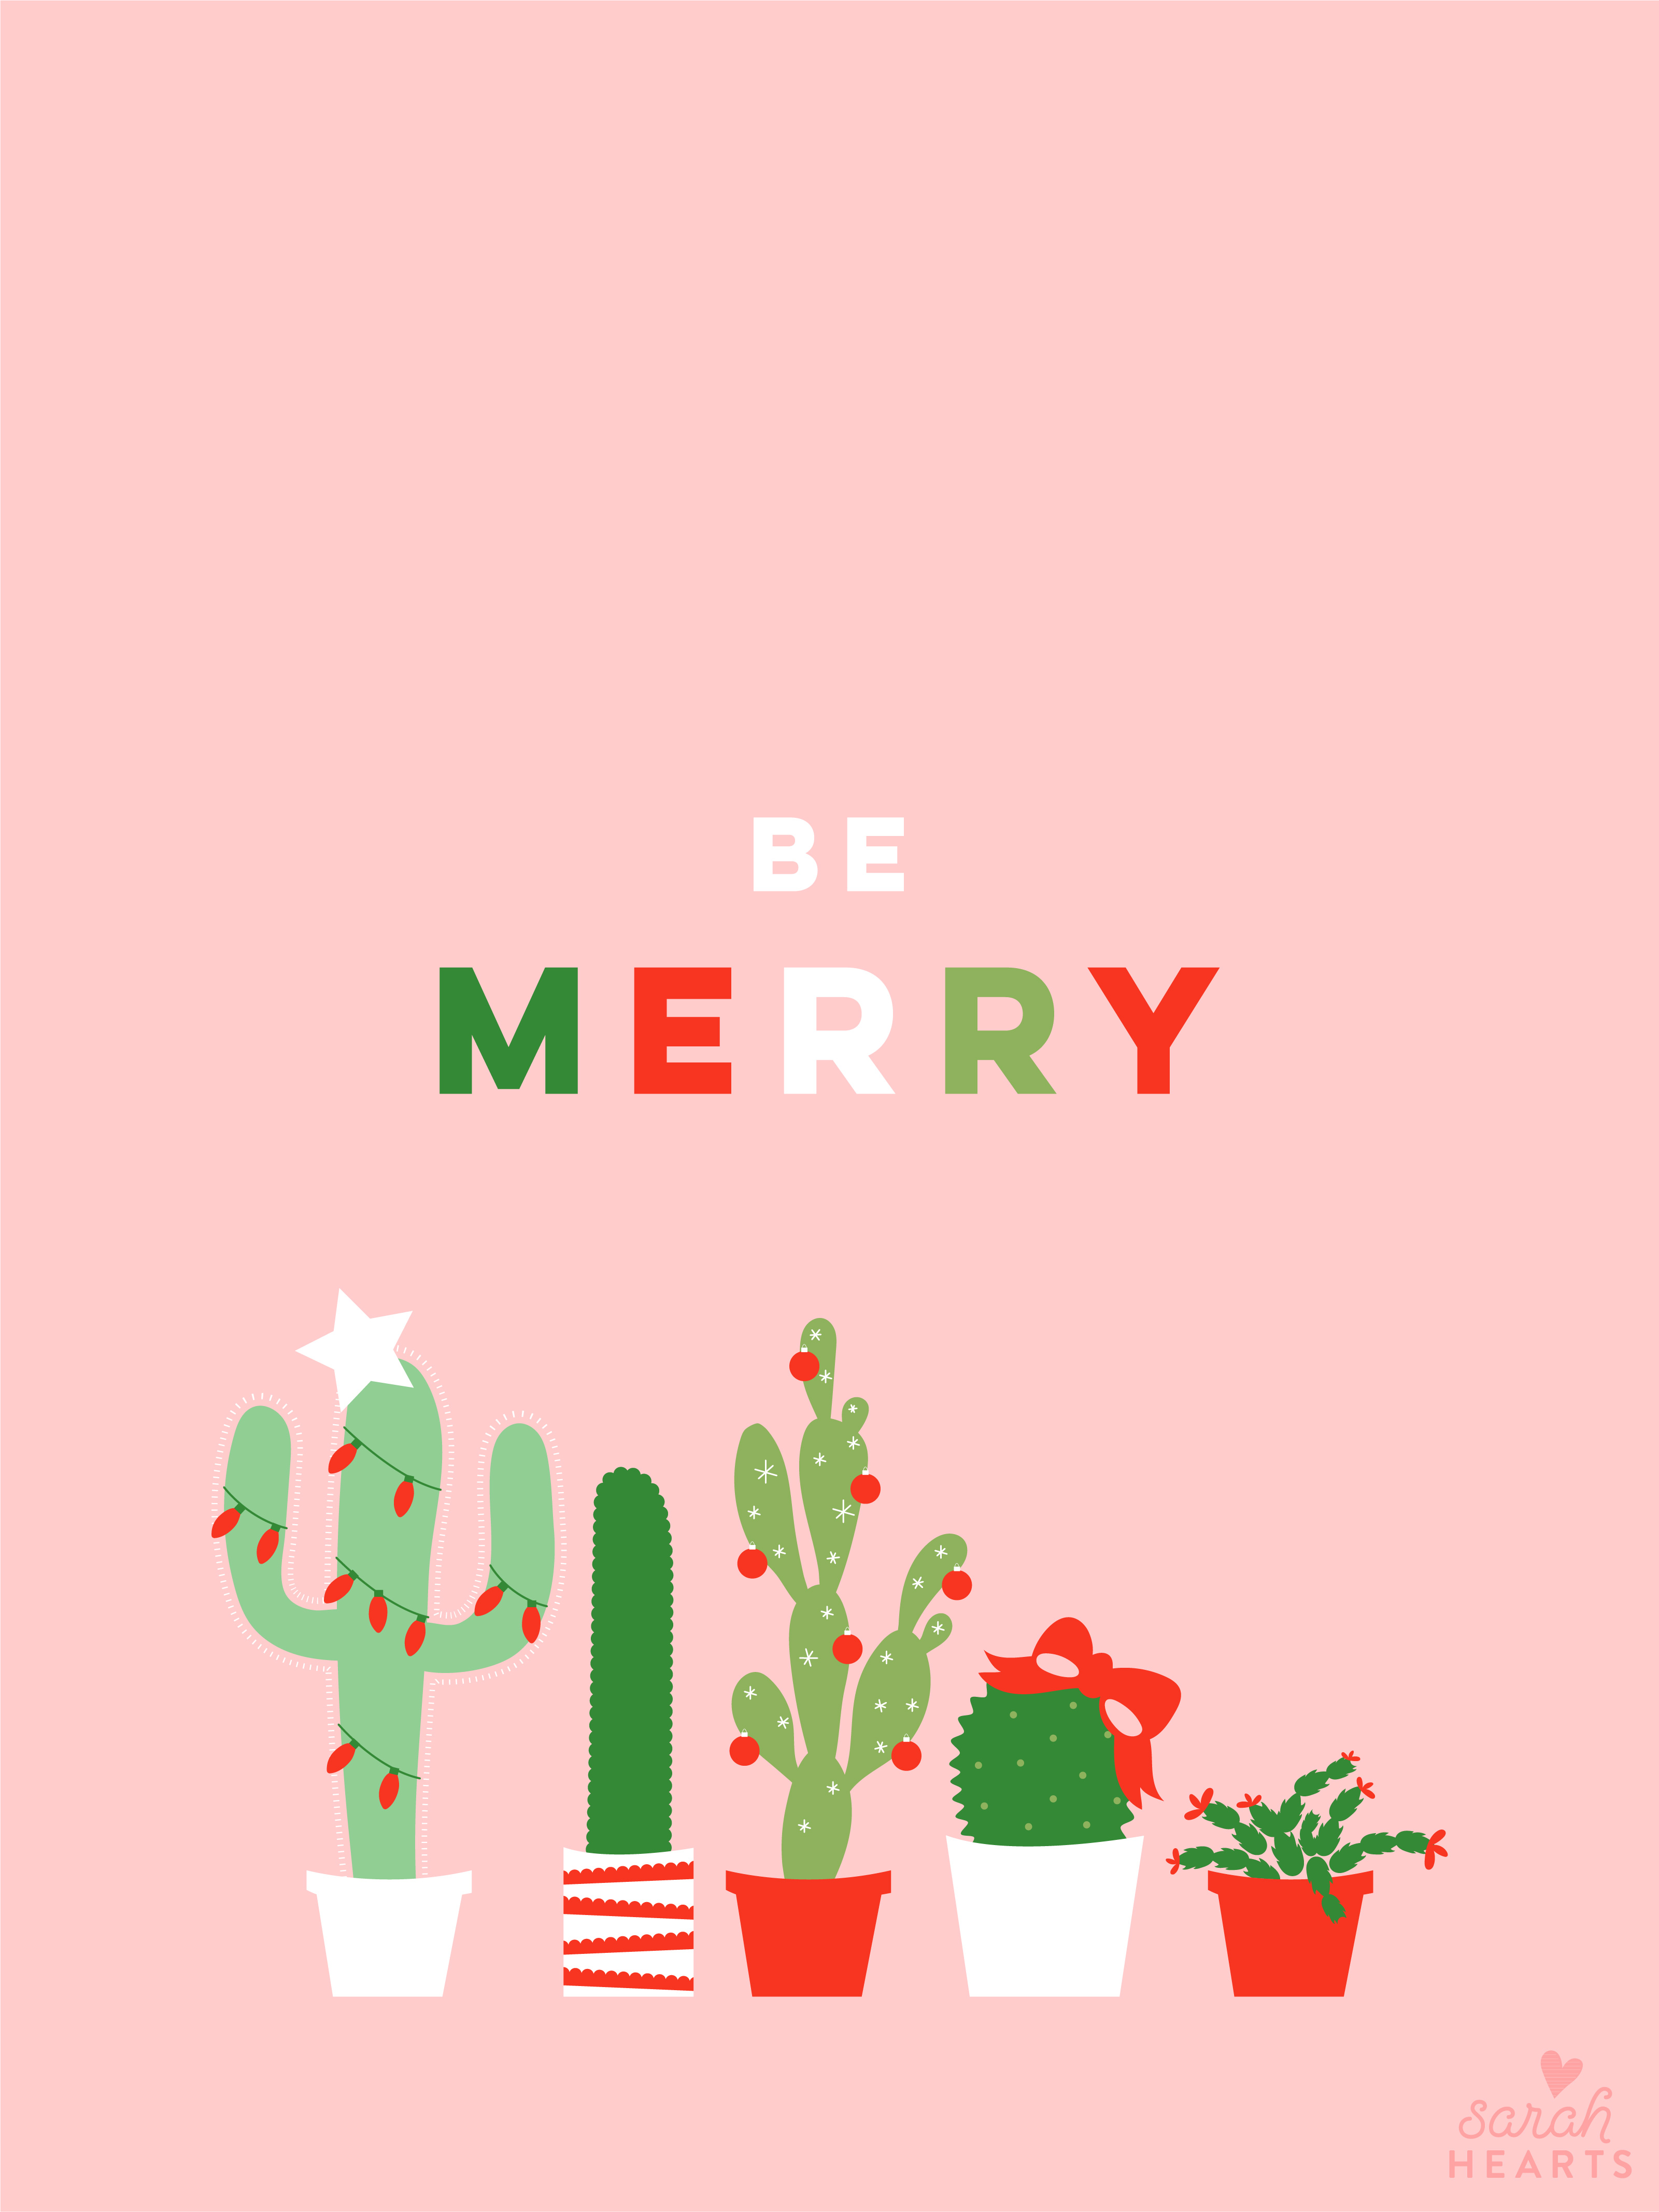 Christmas Quote Wallpapers